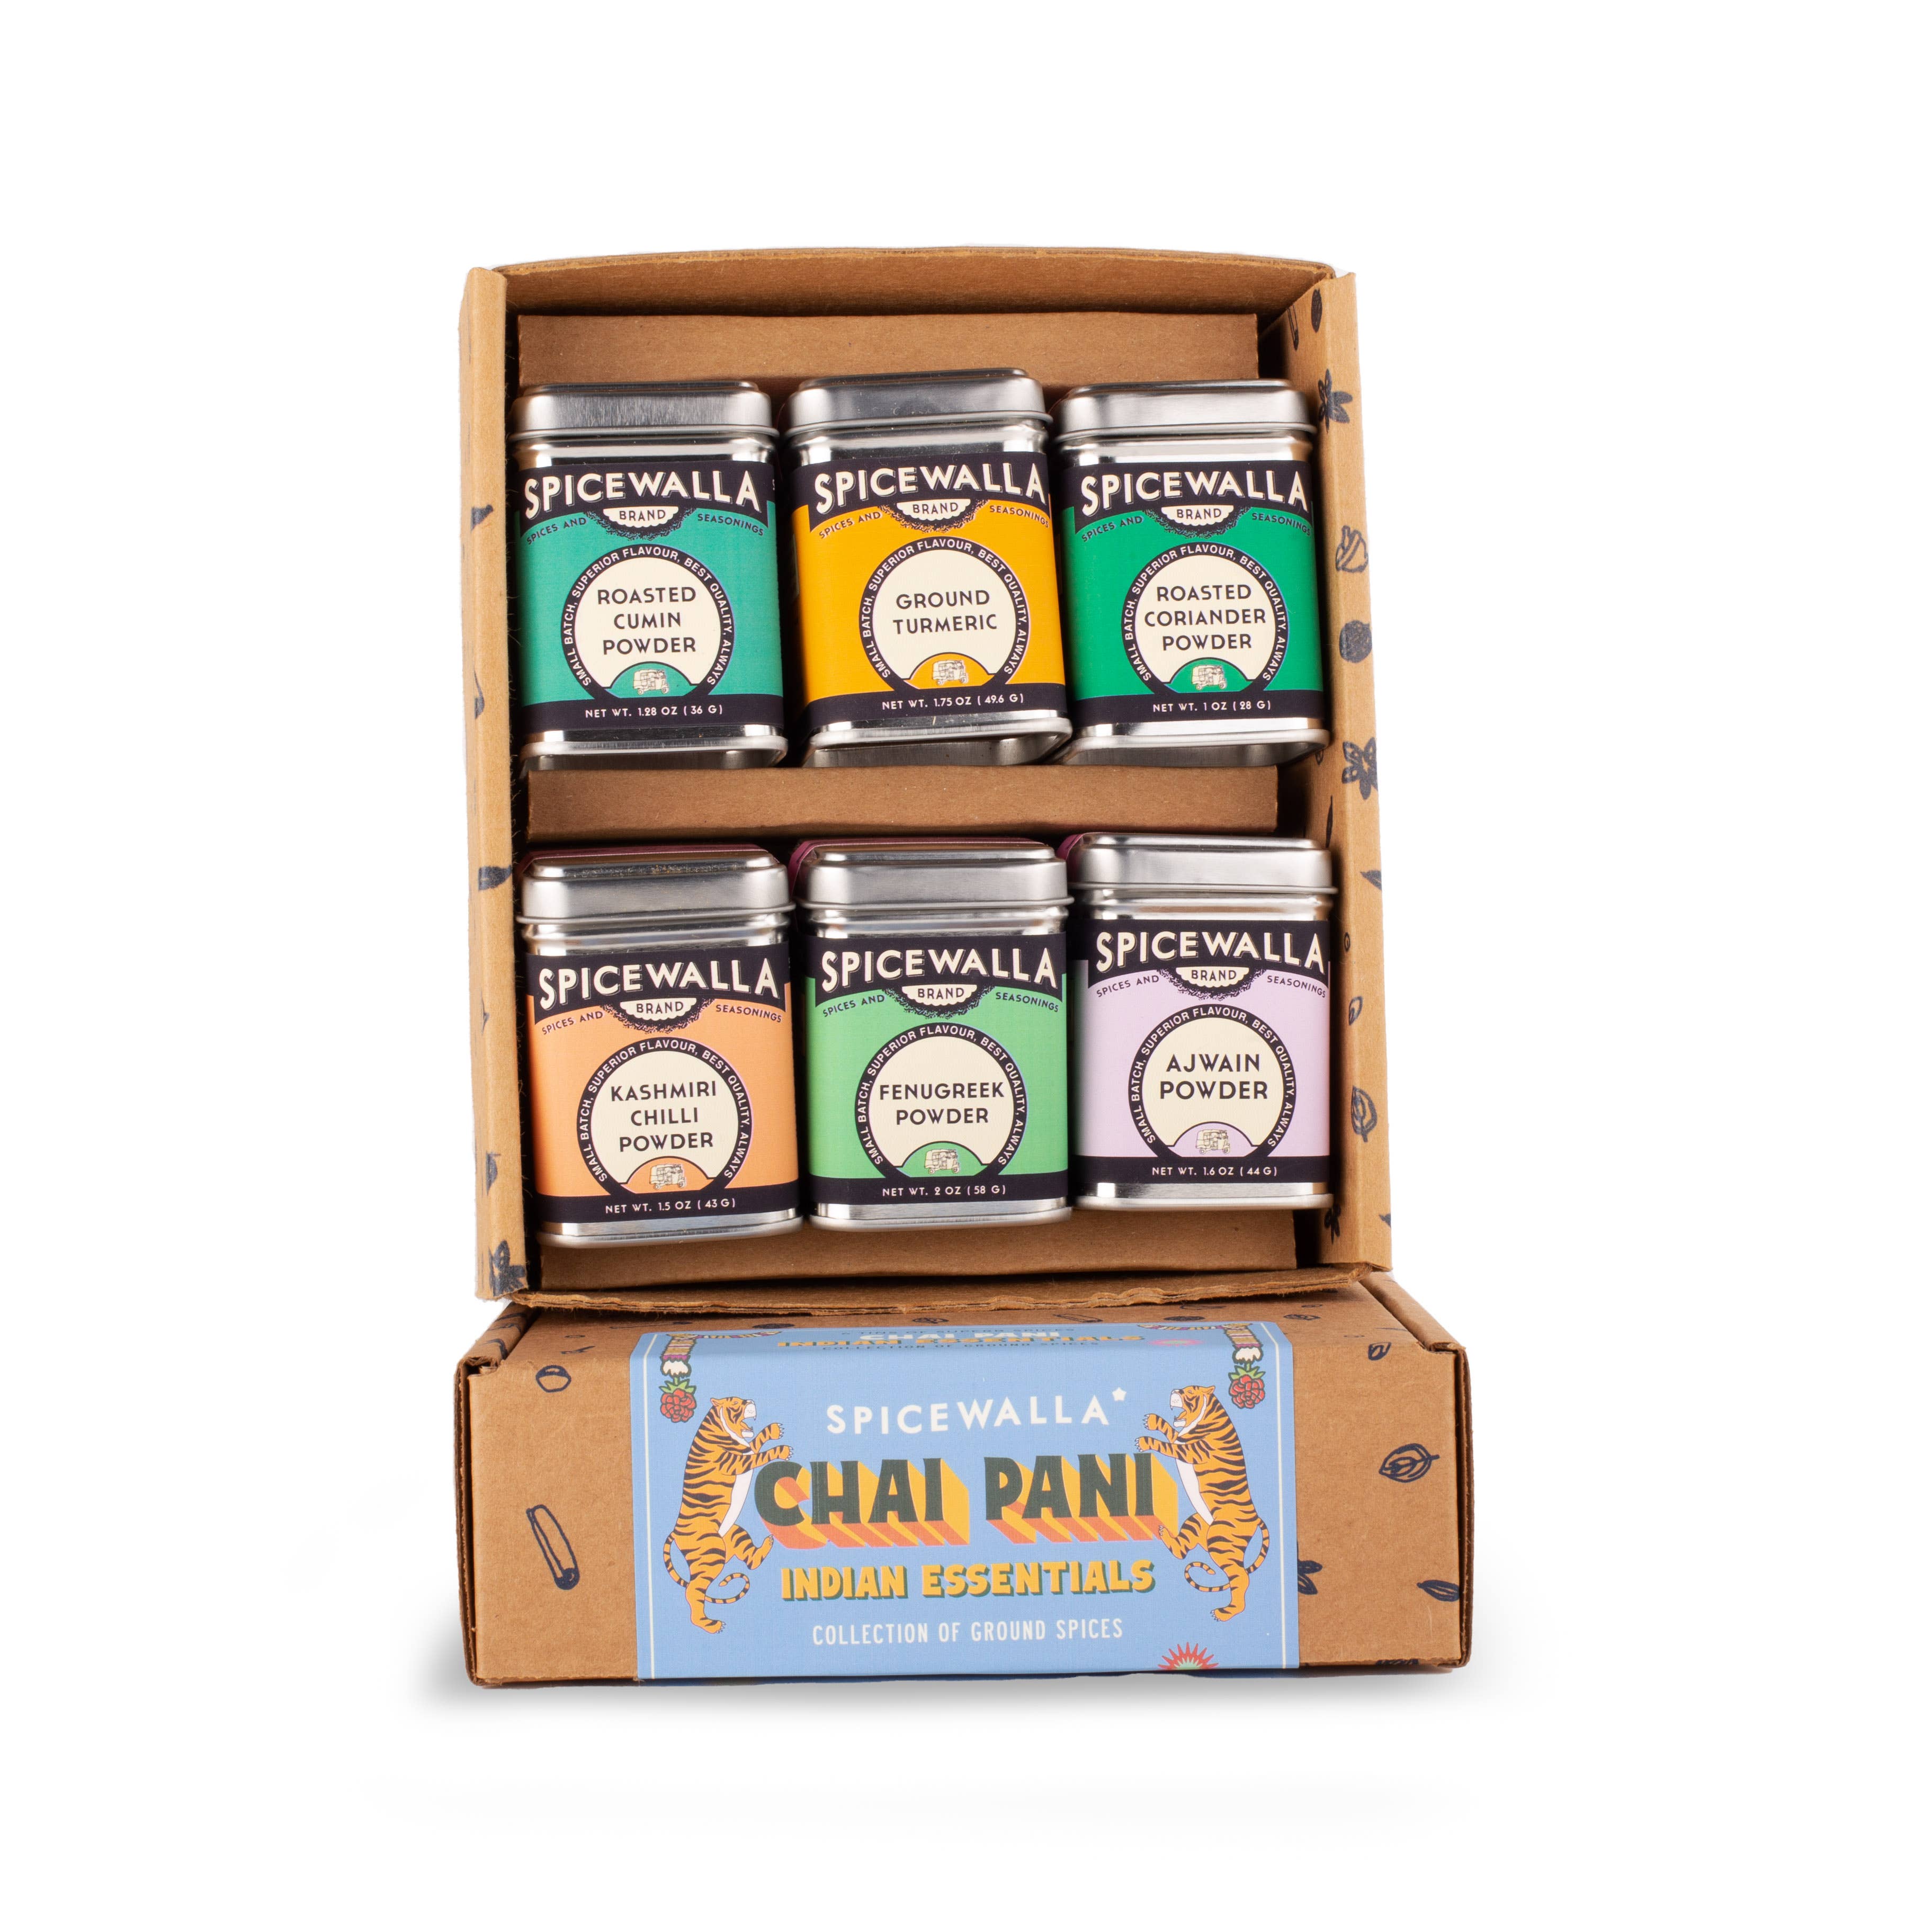 Chai Pani Indian Essentials Collection 6 Pack